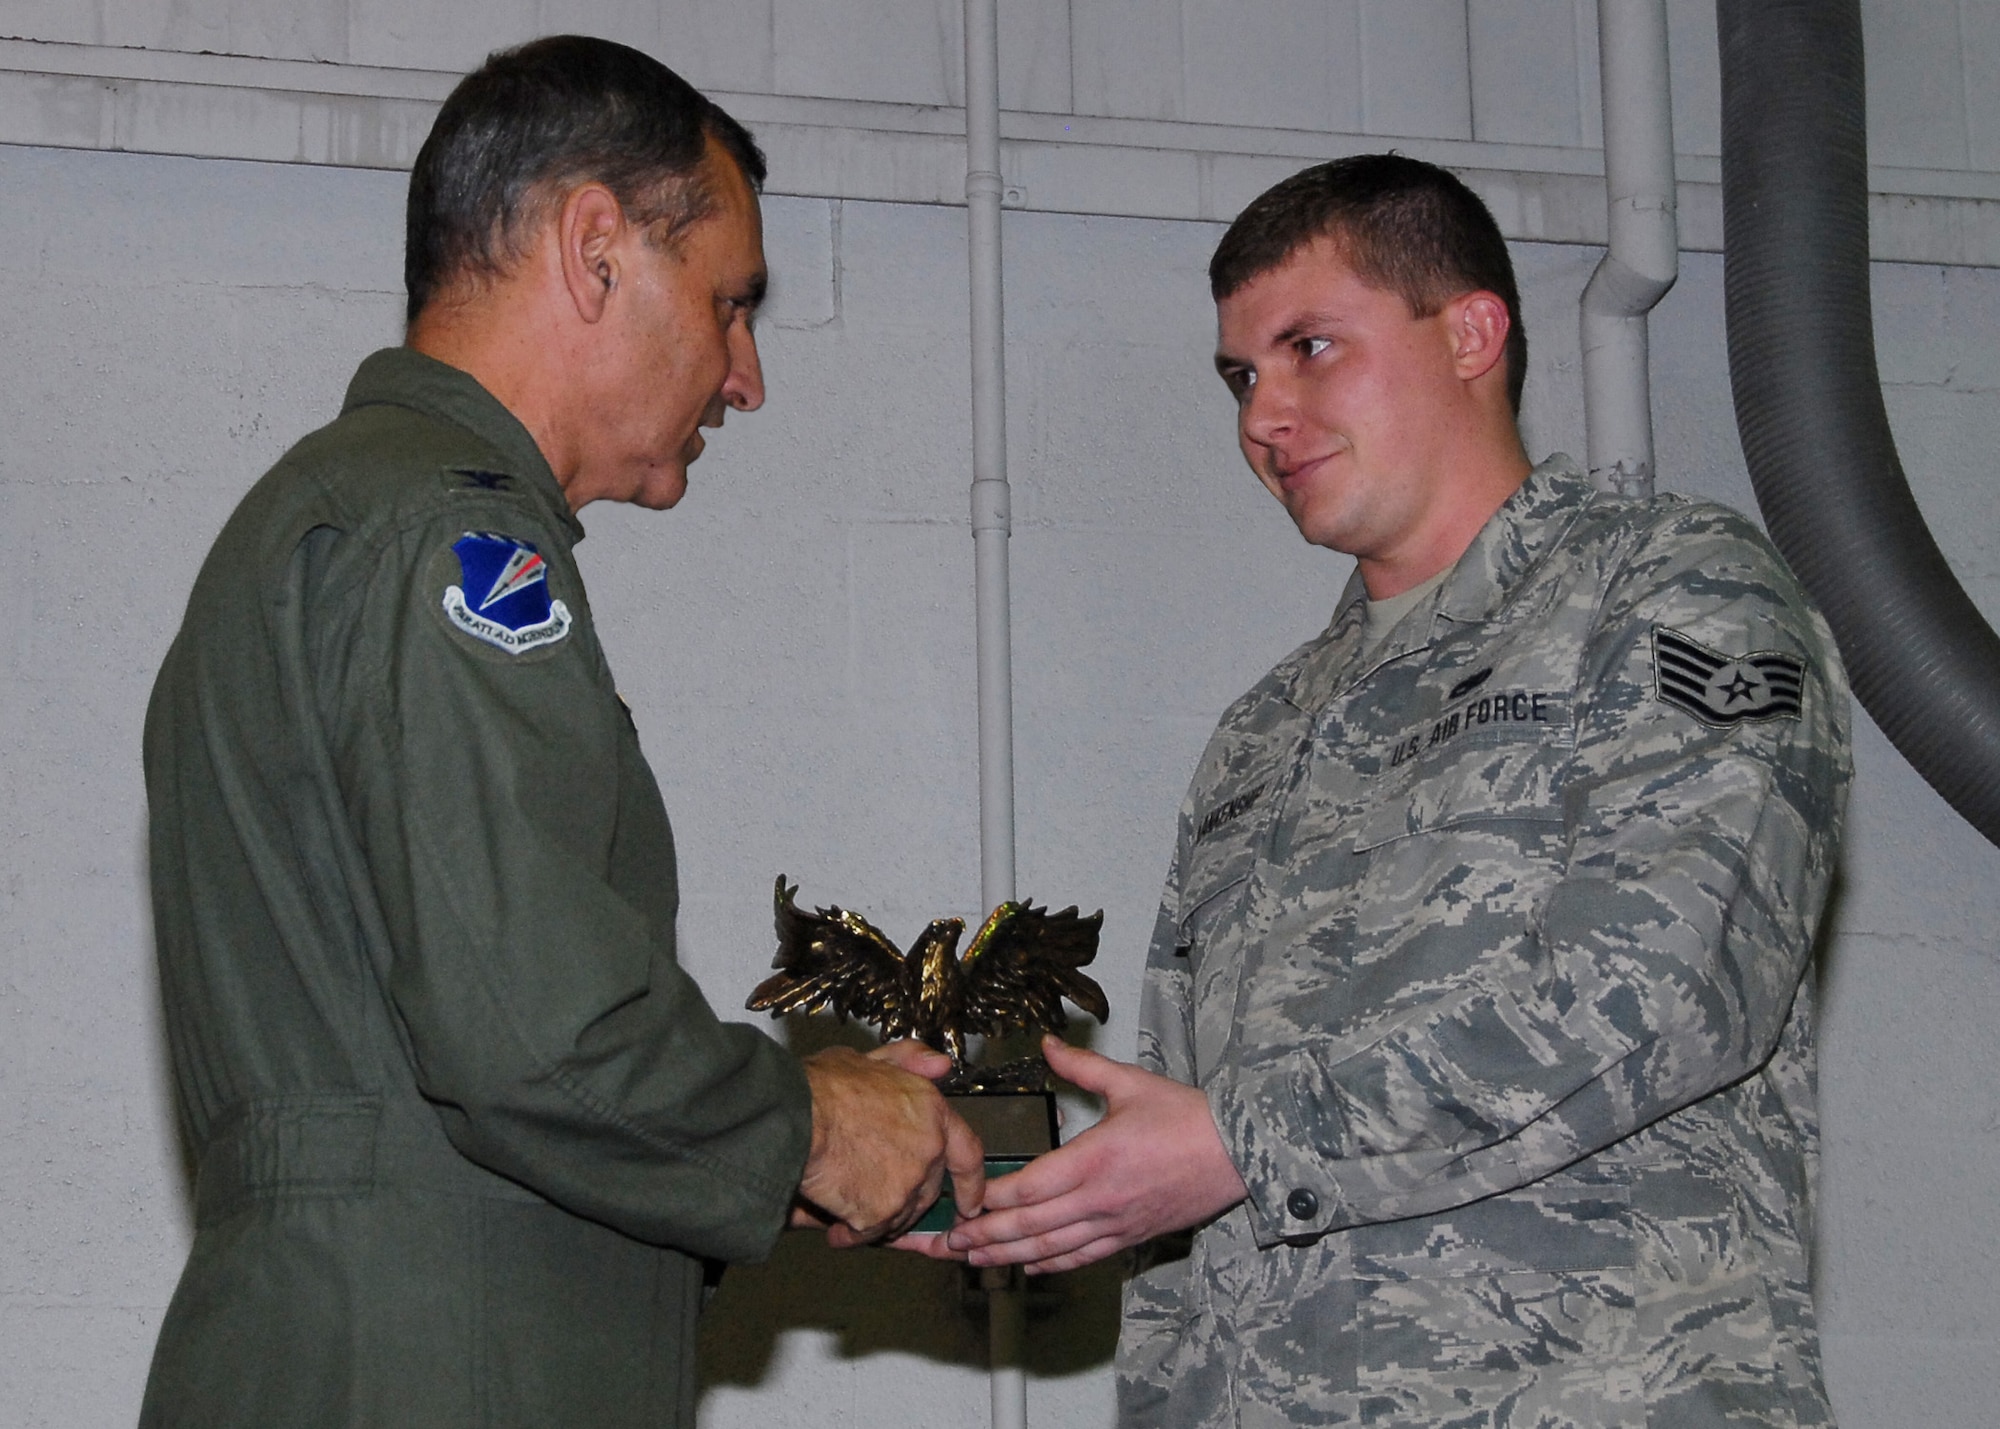 Tech Sgt William Blankenship, 239CBCS, Outstanding NCO of the Year 2009, receives an Eagle trophy from Col Robert Leeker, 131st Bomb Wing commander, during the 131st Outstanding Airman of the Year awards on Dec 6 at Lambert-Saint Louis ANGB..  (Air Force Photo by Master Sgt Mary-Dale Amison   RELEASED)
 